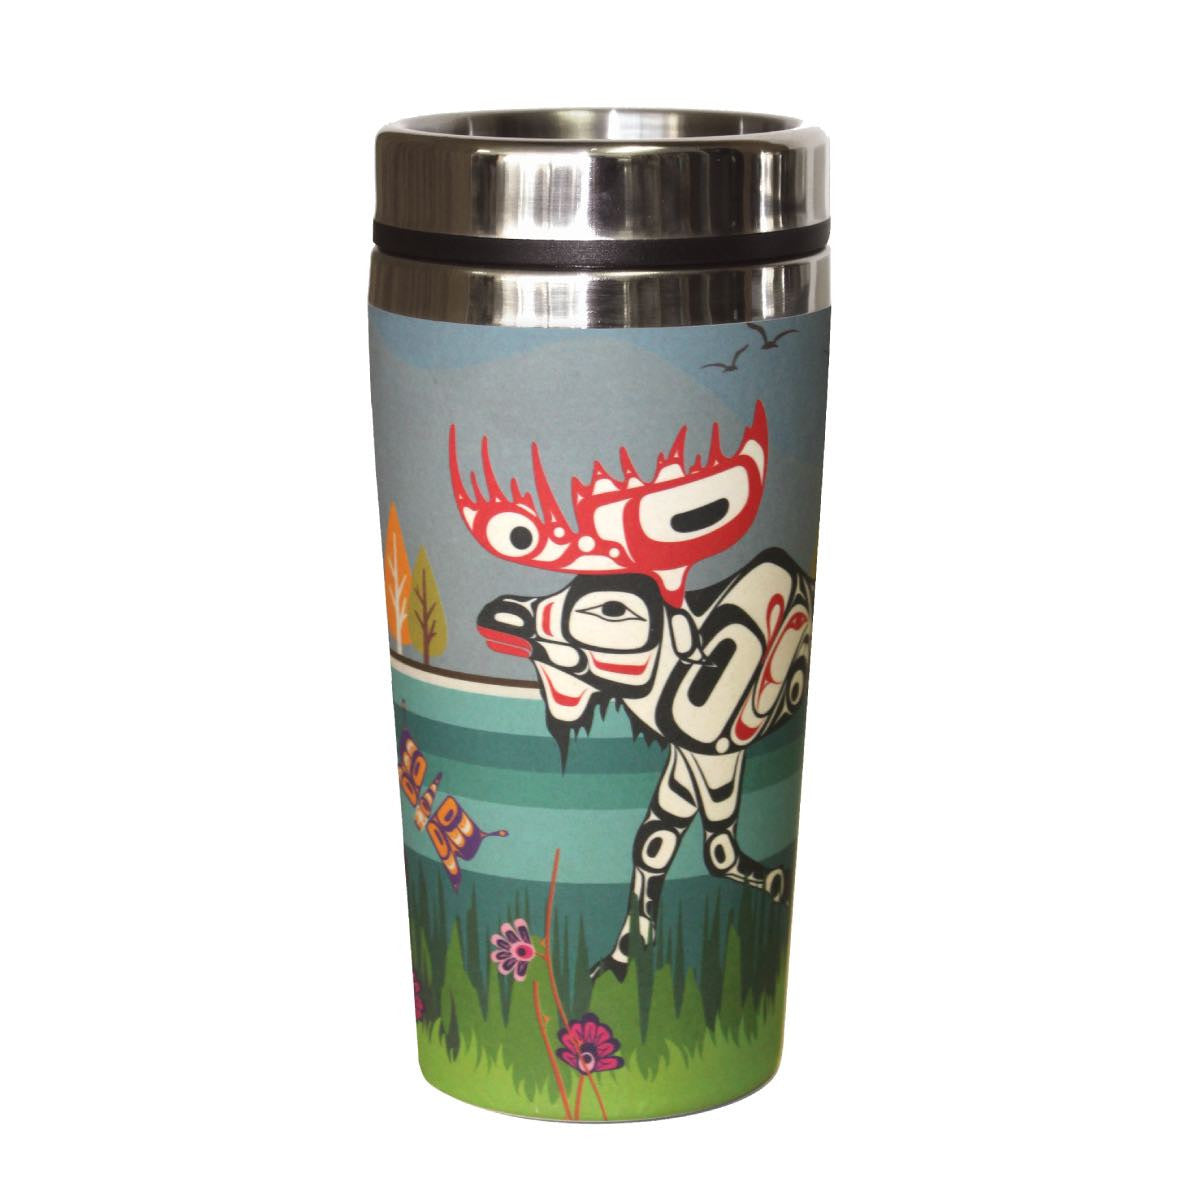 Bamboo Fibre Stainless Steel Travel Mug | Moose by Terry Starr